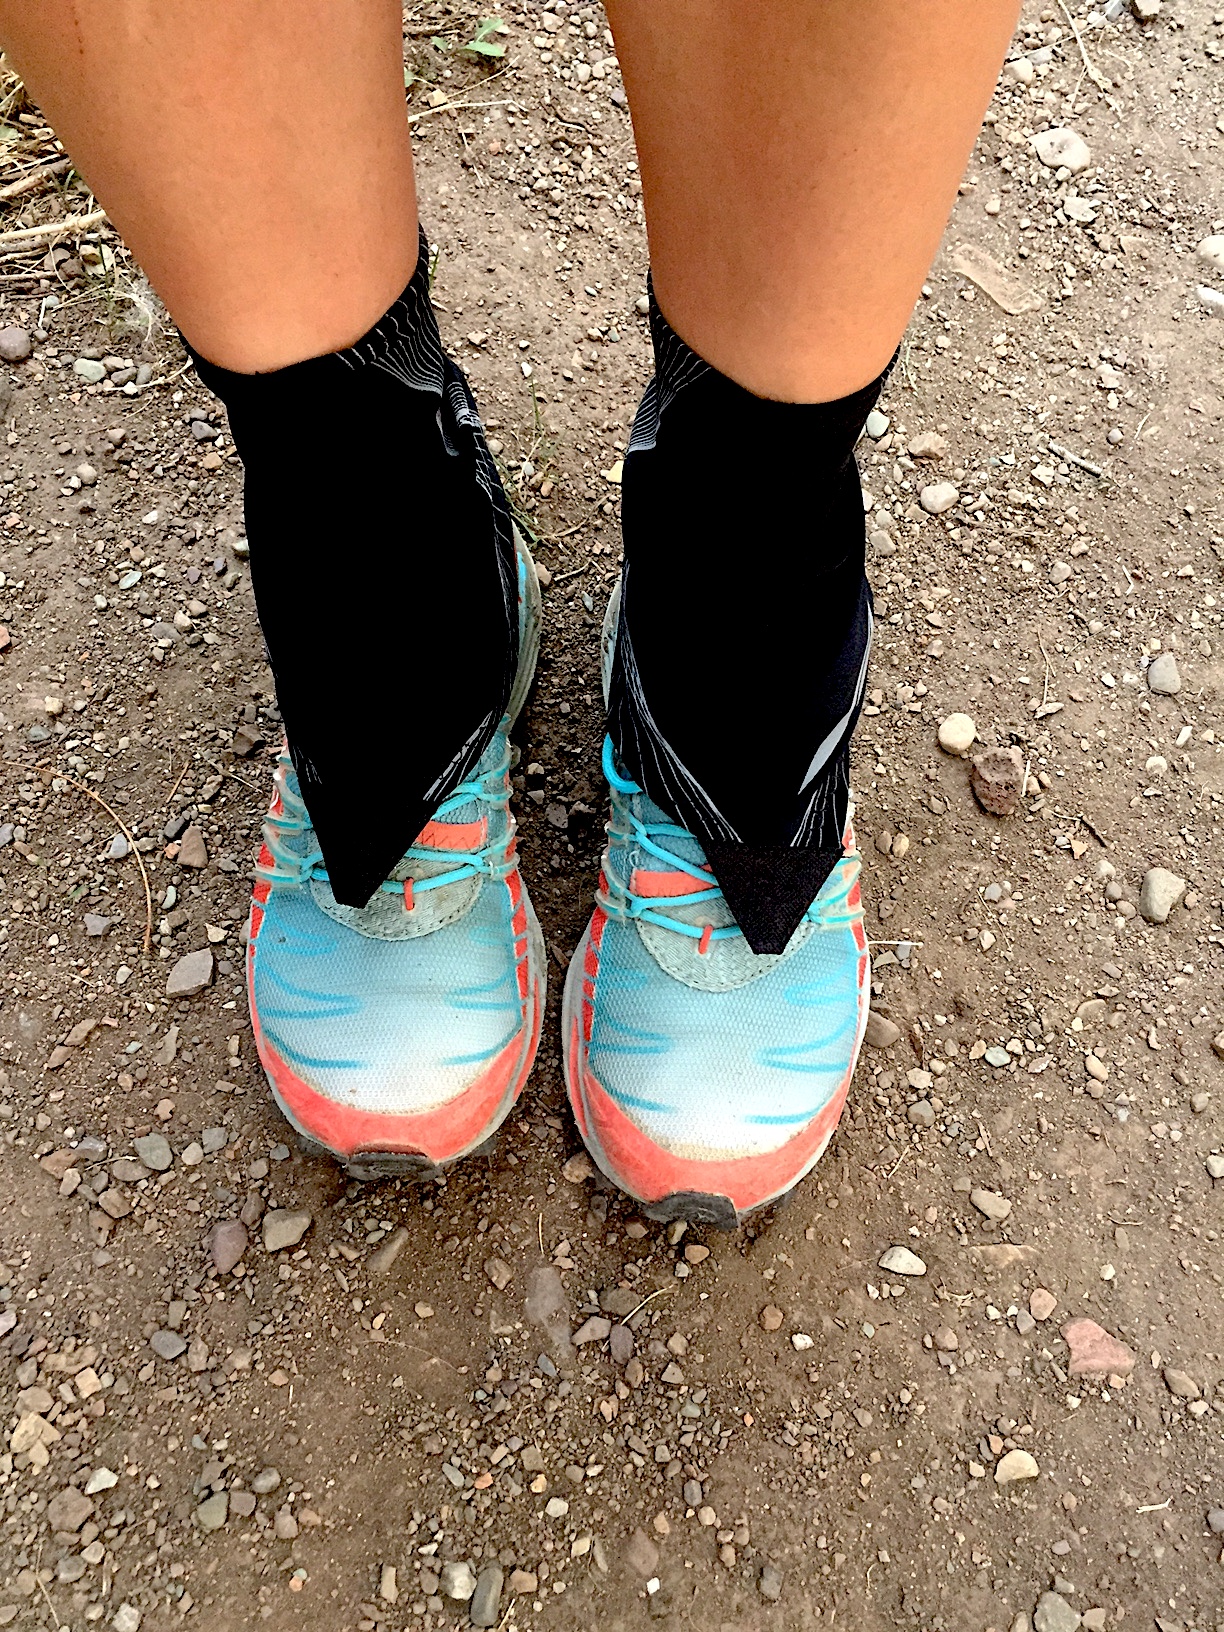 Product Review: Altra Trail Gaiters - The Runners Edge